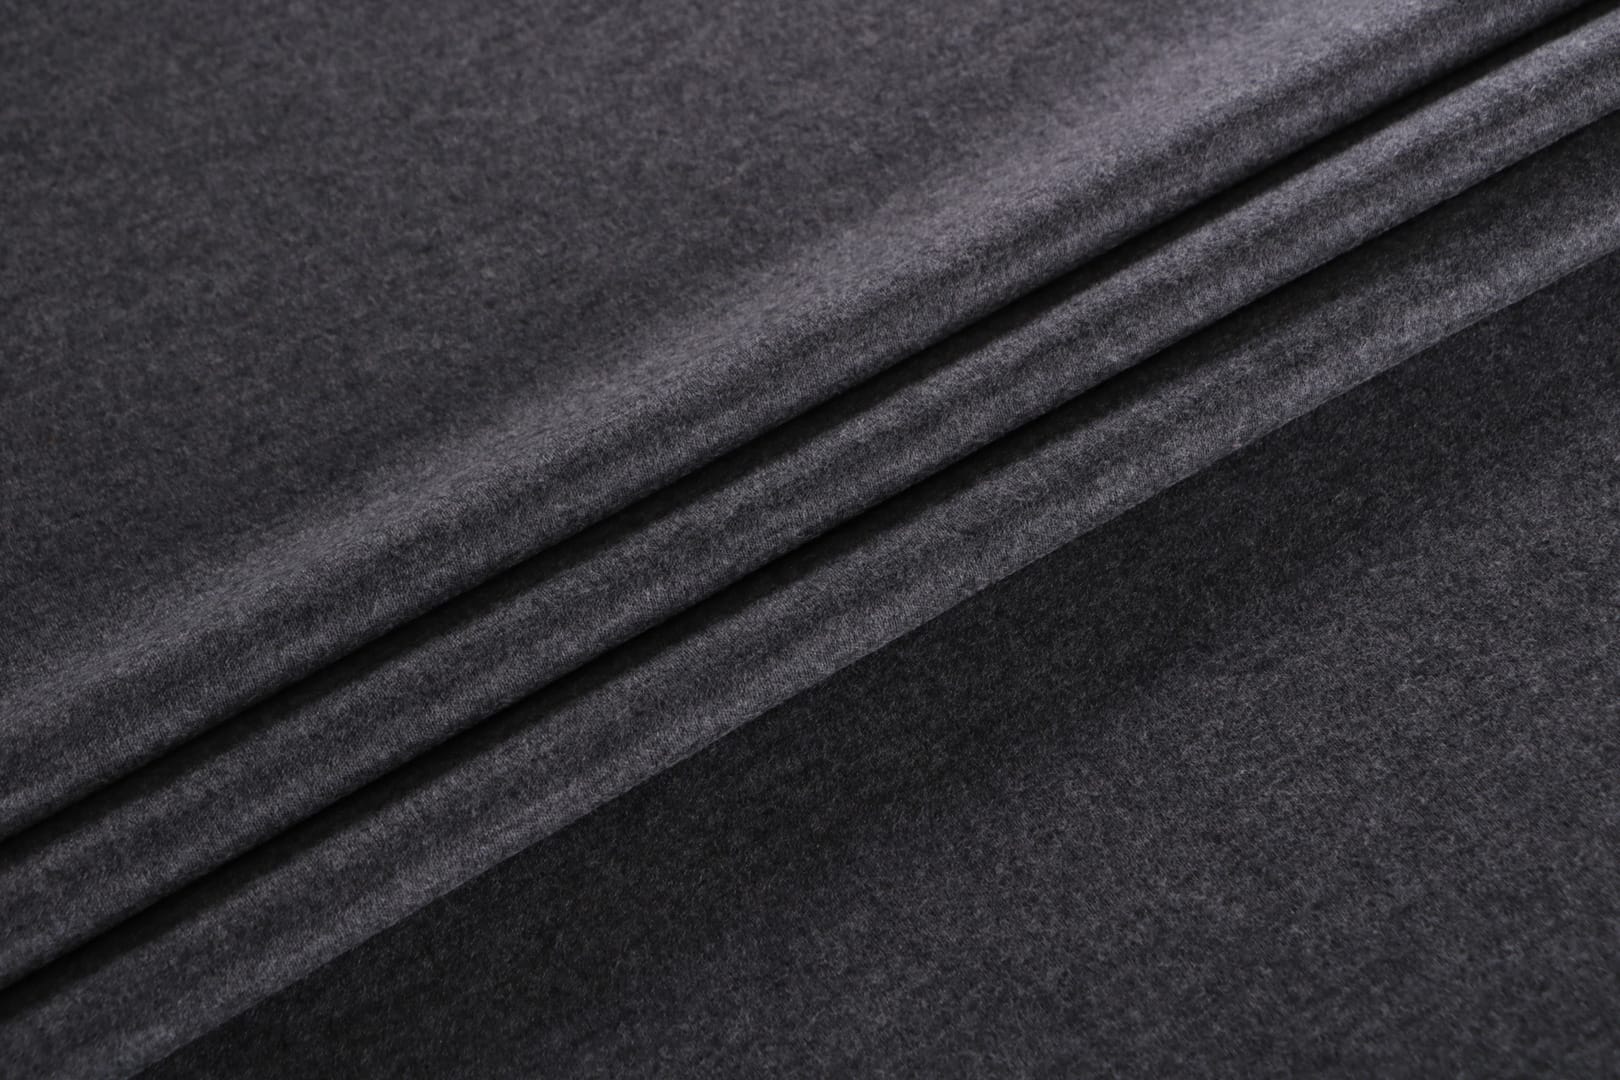 Gray Wool fabric for dressmaking